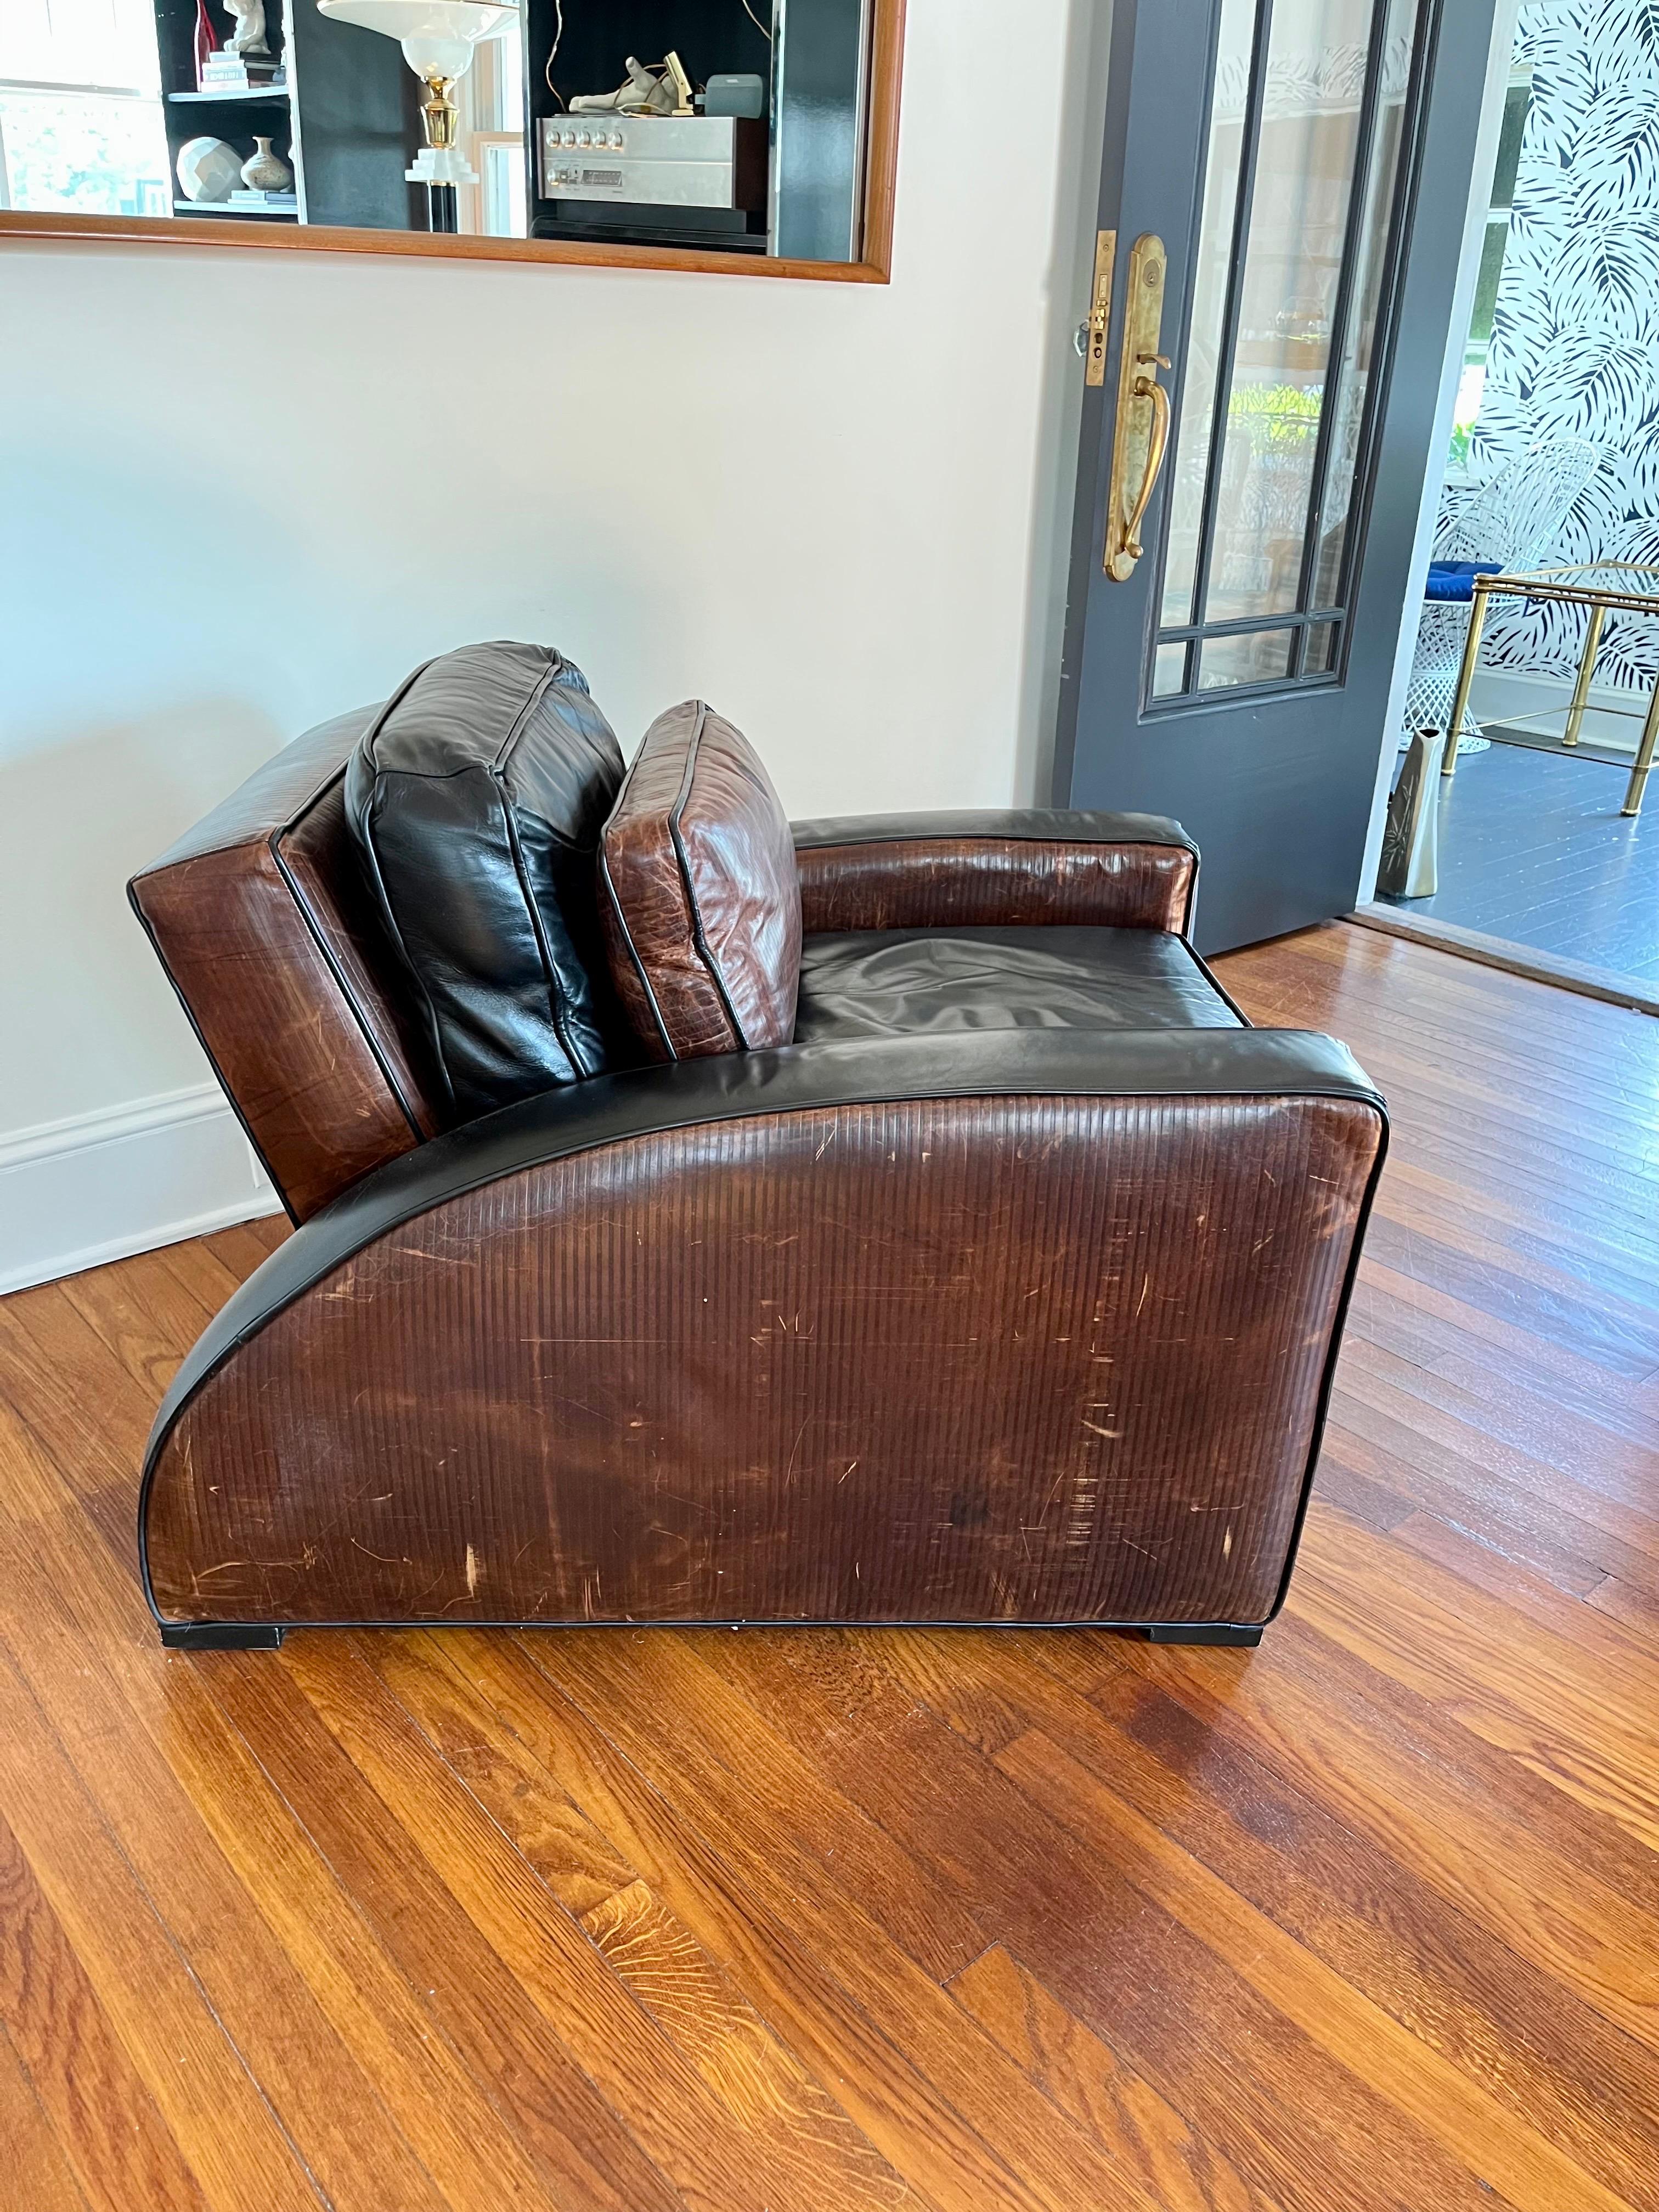 Wonderful art deco club chair and ottoman.WALT DISNEY SIGNATURE COLLECTION. Nicely detailed with two tone and textured leather. Soft subtle leather and back pillow. Sides with contrasting Vertical tool lined leather.
Ottoman measures